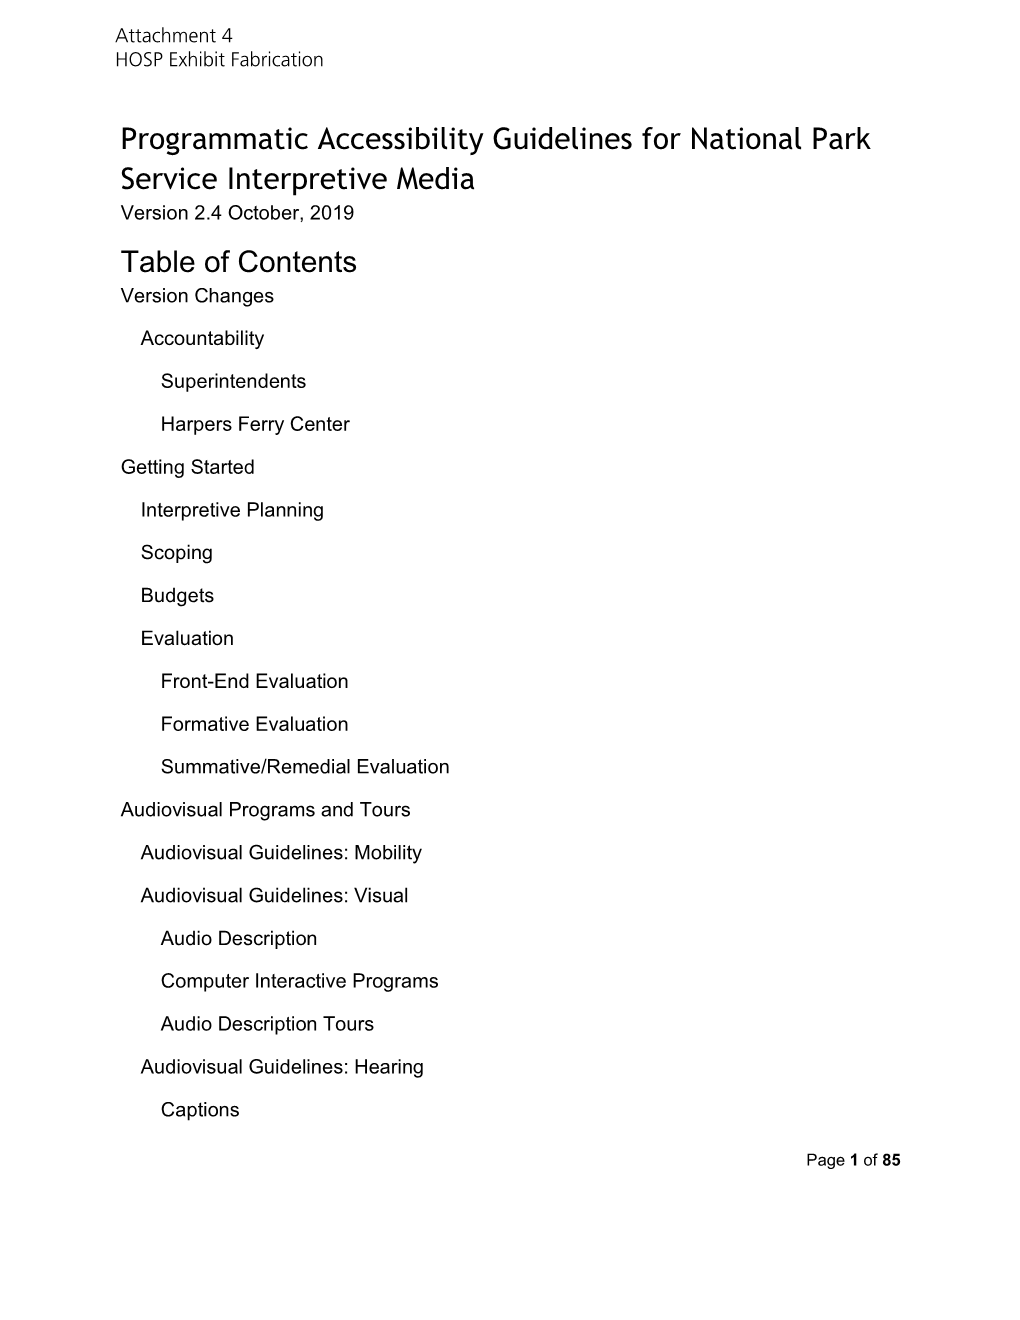 Programmatic Accessibility Guidelines for National Park Service Interpretive Media Version 2.4 October, 2019 Table of Contents Version Changes